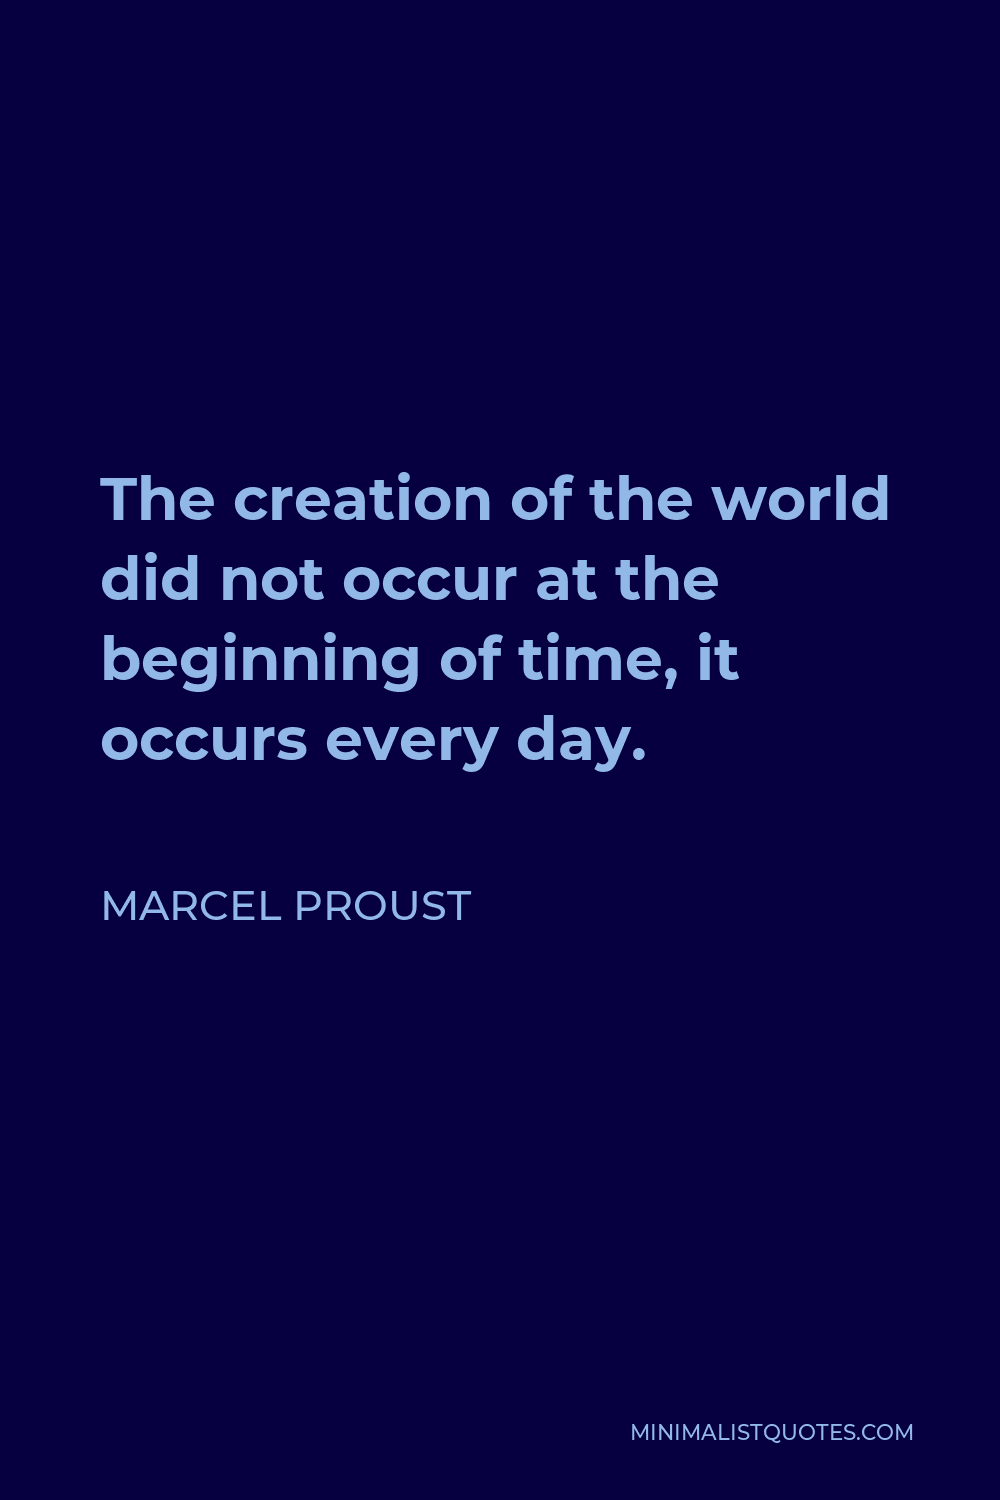 Marcel Proust Quote - The creation of the world did not occur at the beginning of time, it occurs every day.